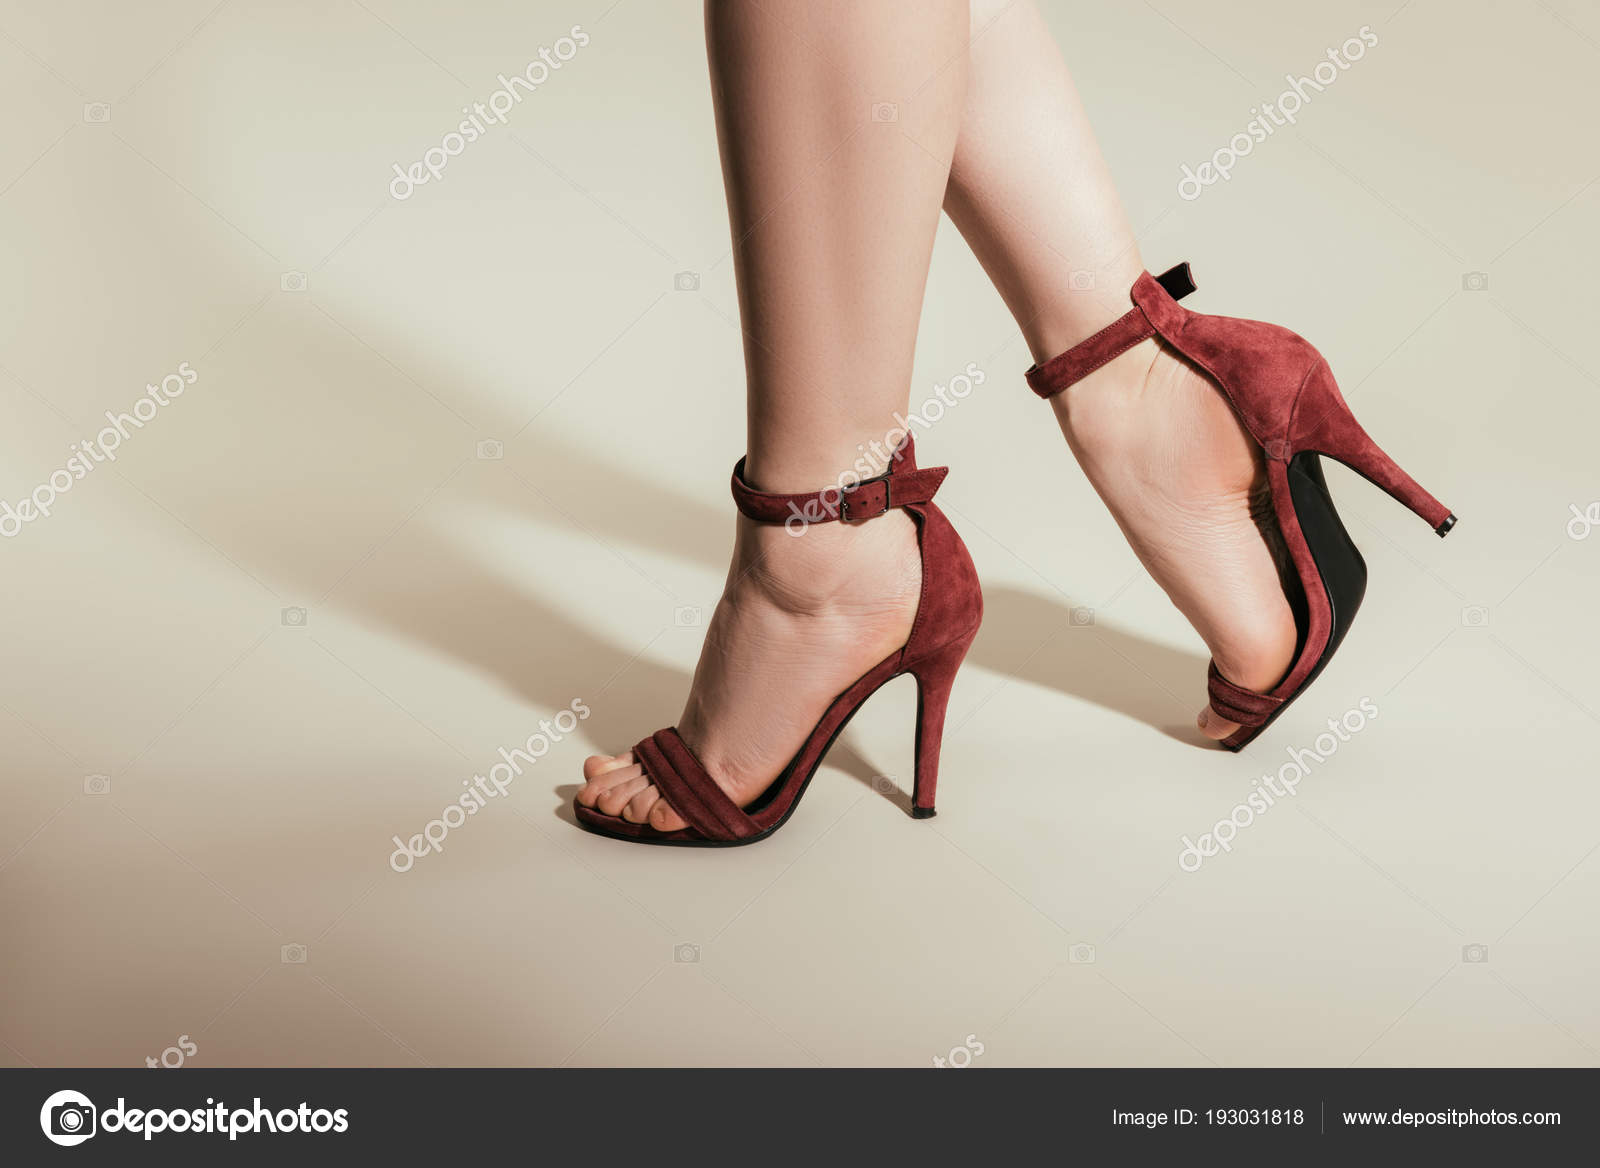 Fashionable Woman Long Legs In Tights Black Stylish High Heels Shoes With  Rhinestones Stock Photo - Download Image Now - iStock